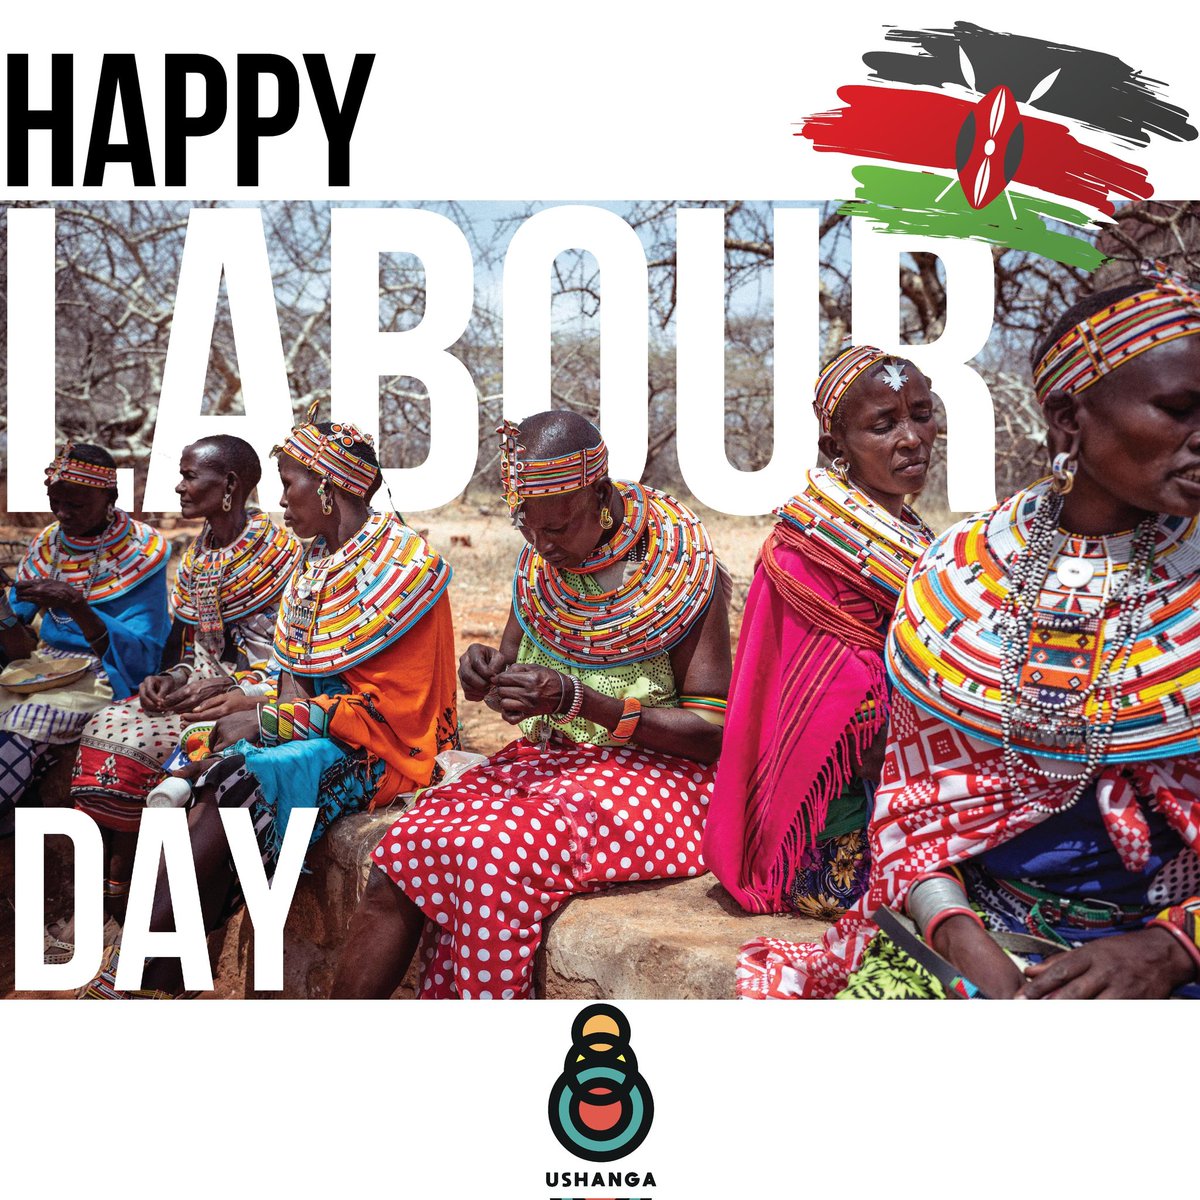 Happy Labour Day!
Today we celebrate the Success and Resilience of our Women.

#UshangaKe 
#Nunuashangajengamama 
#pastoralist 
#beadwork 
#culture
#heritage